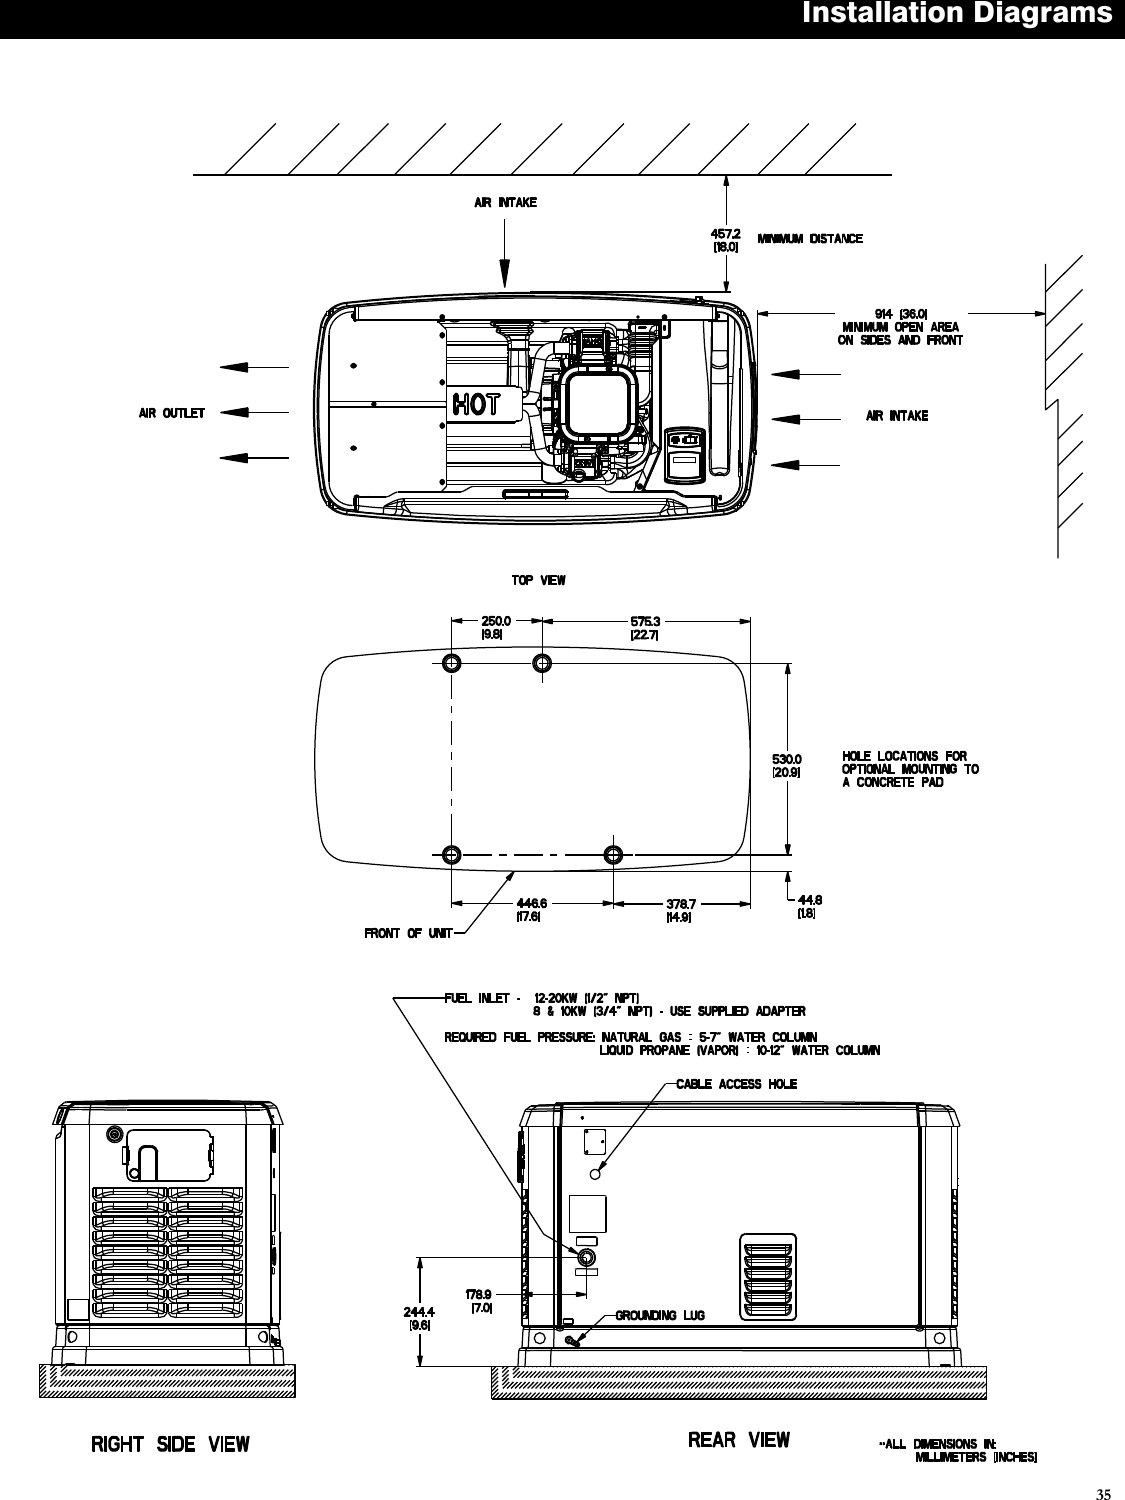 Page 3 of 3 - C  6847 3 Generac 6244 Install Drawing